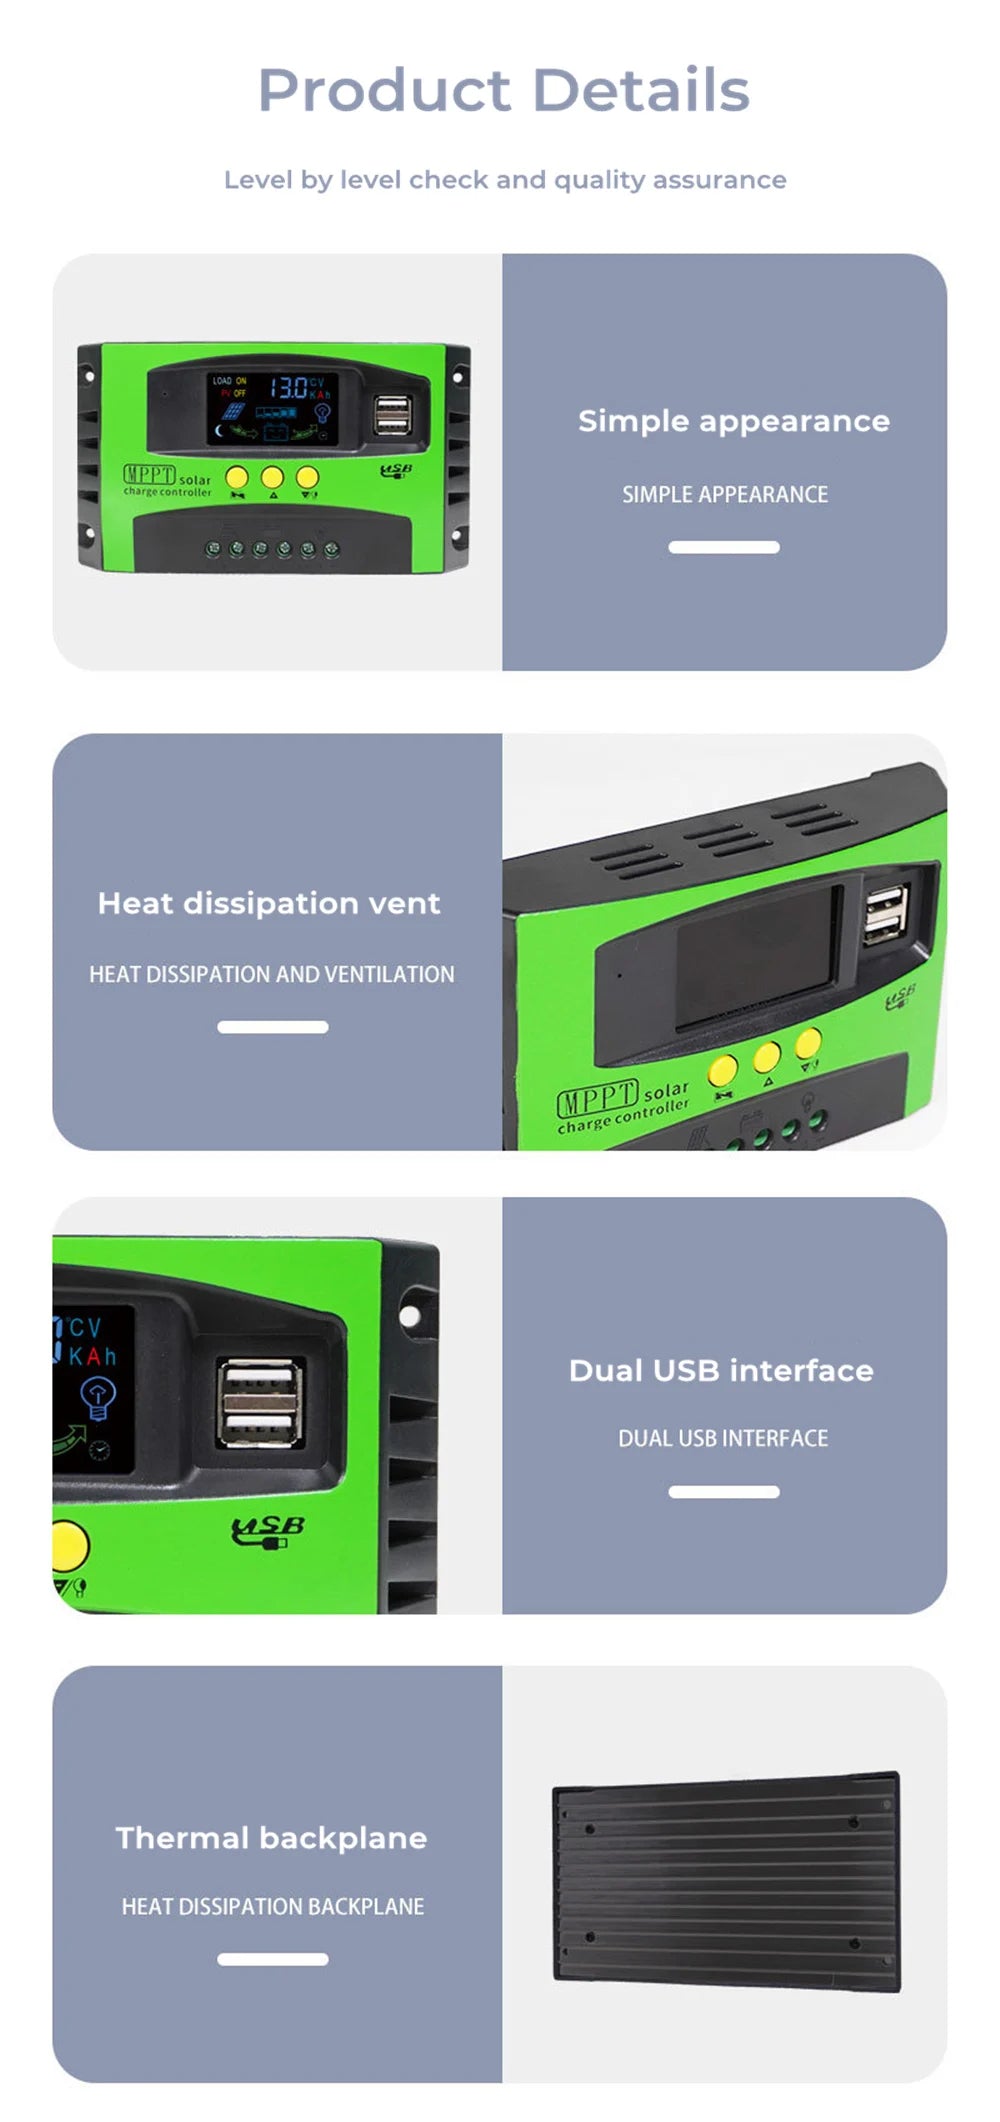 MPPT solar charger controller with dual USB ports and cooling vents for efficient charging.